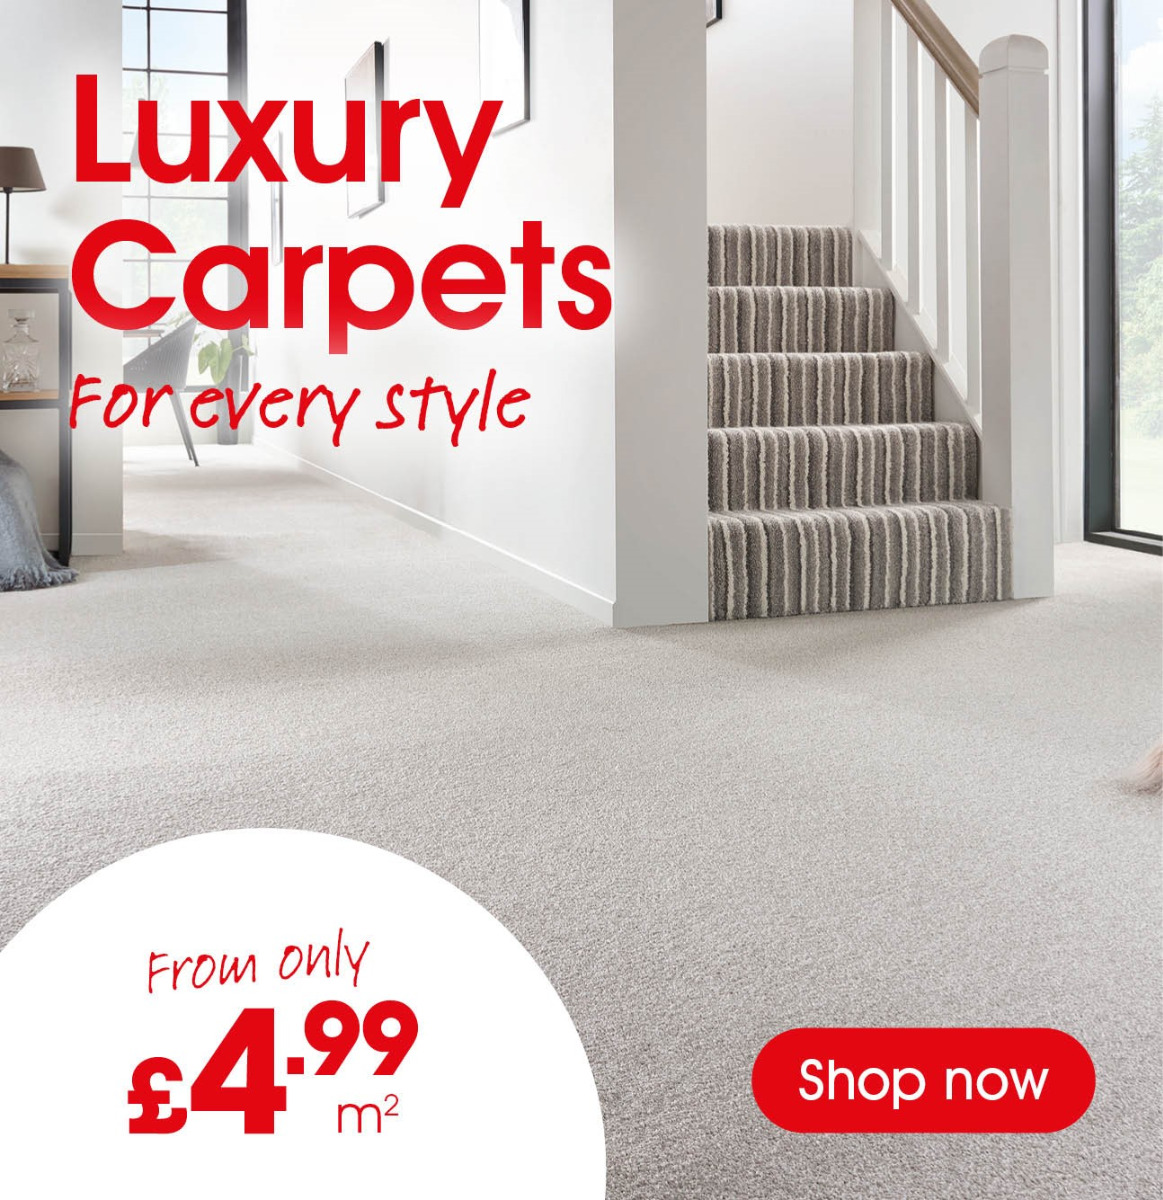 United Carpets - 1000s of luxury carpets to choose from